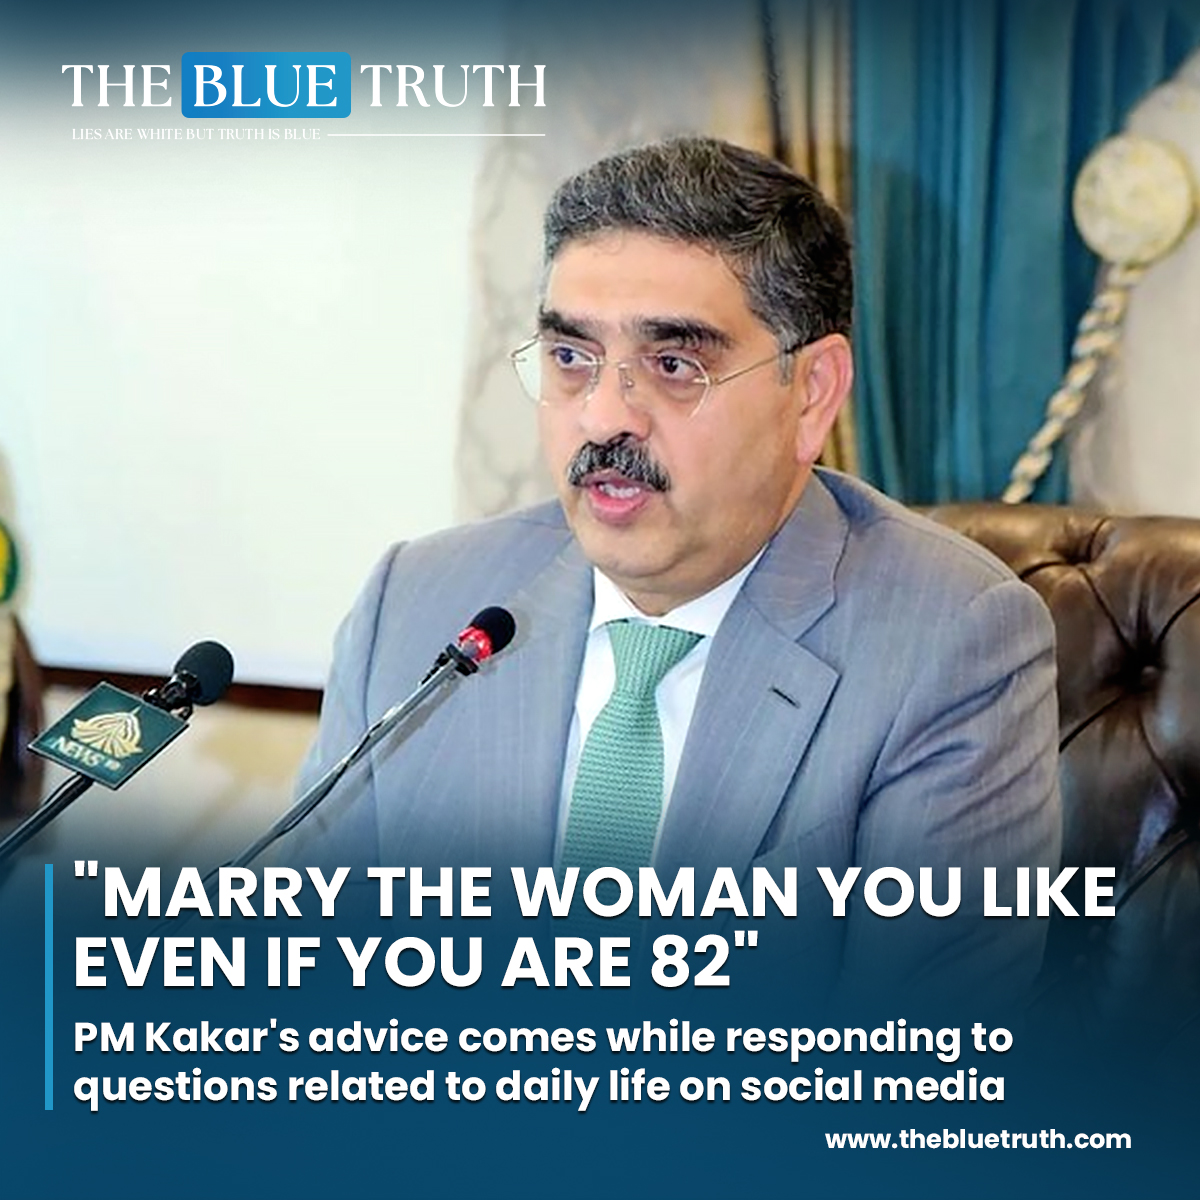 'Marry the woman you like even if you are 82'.
PM Kakar's advice comes while responding to questions related to daily life on social media.

#PMKakarWisdom #RelationshipAdvice #MarriageWisdom
#LifeQuotes #LoveKnowsNoAge #LifeWisdom #tbt #TheBlueTruth